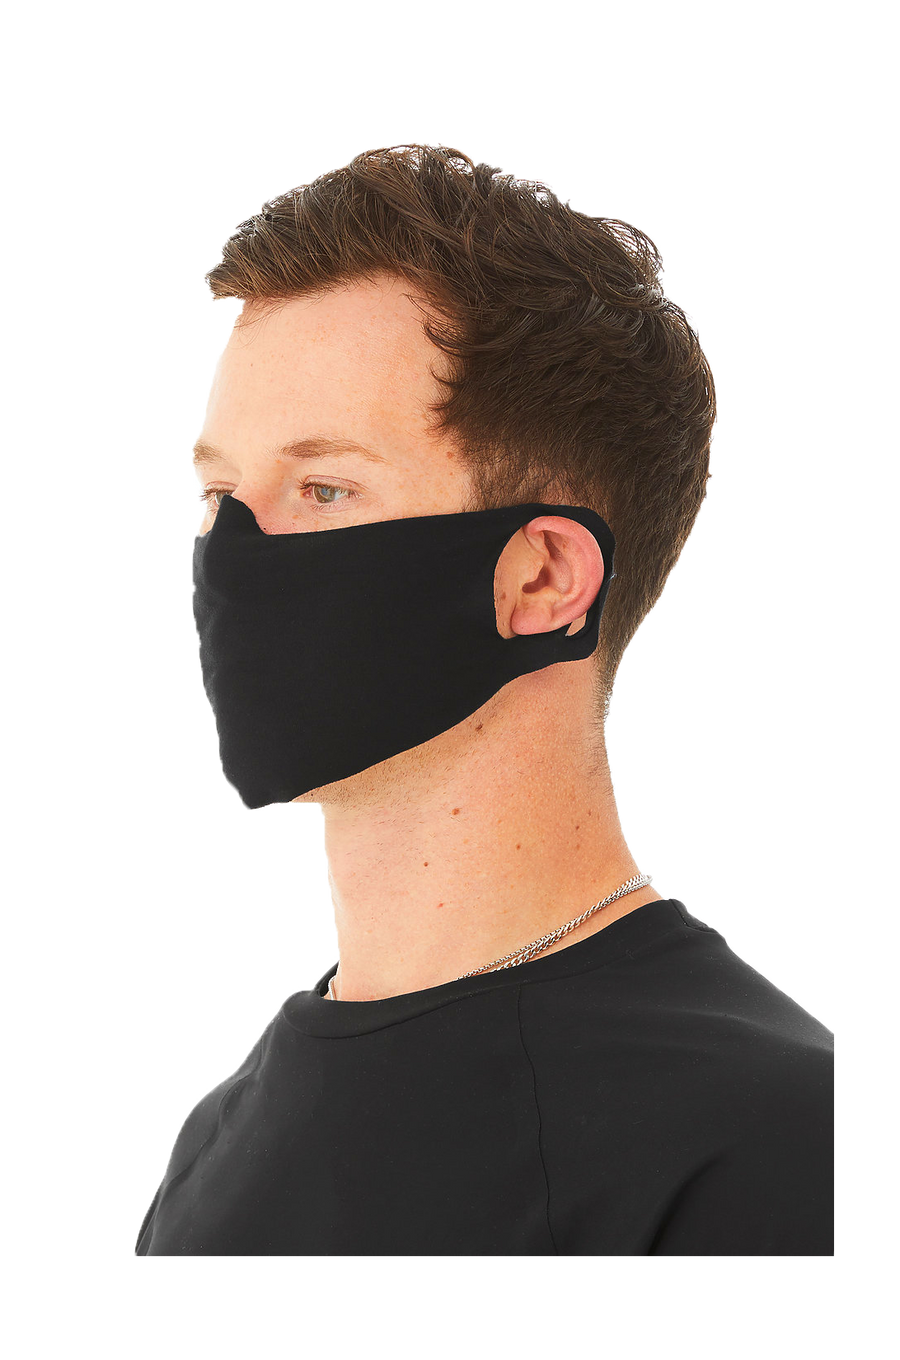 Disposable Daily Face Cover Lightweight Fabric Facecover Made in the USA